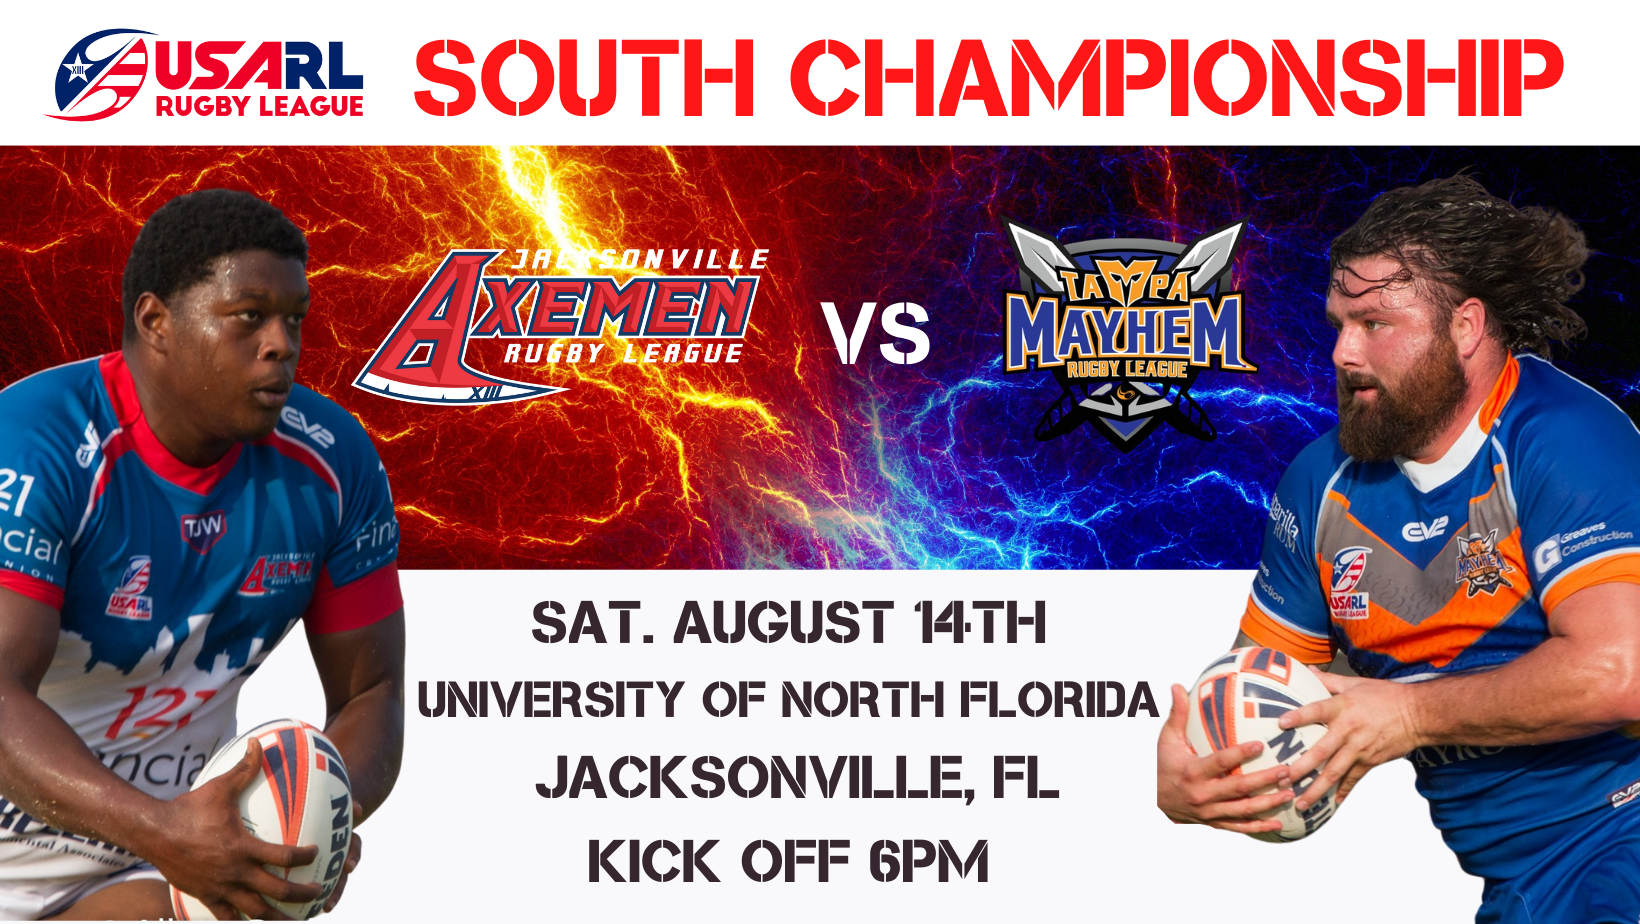 2021 USARL South Championship this weekend